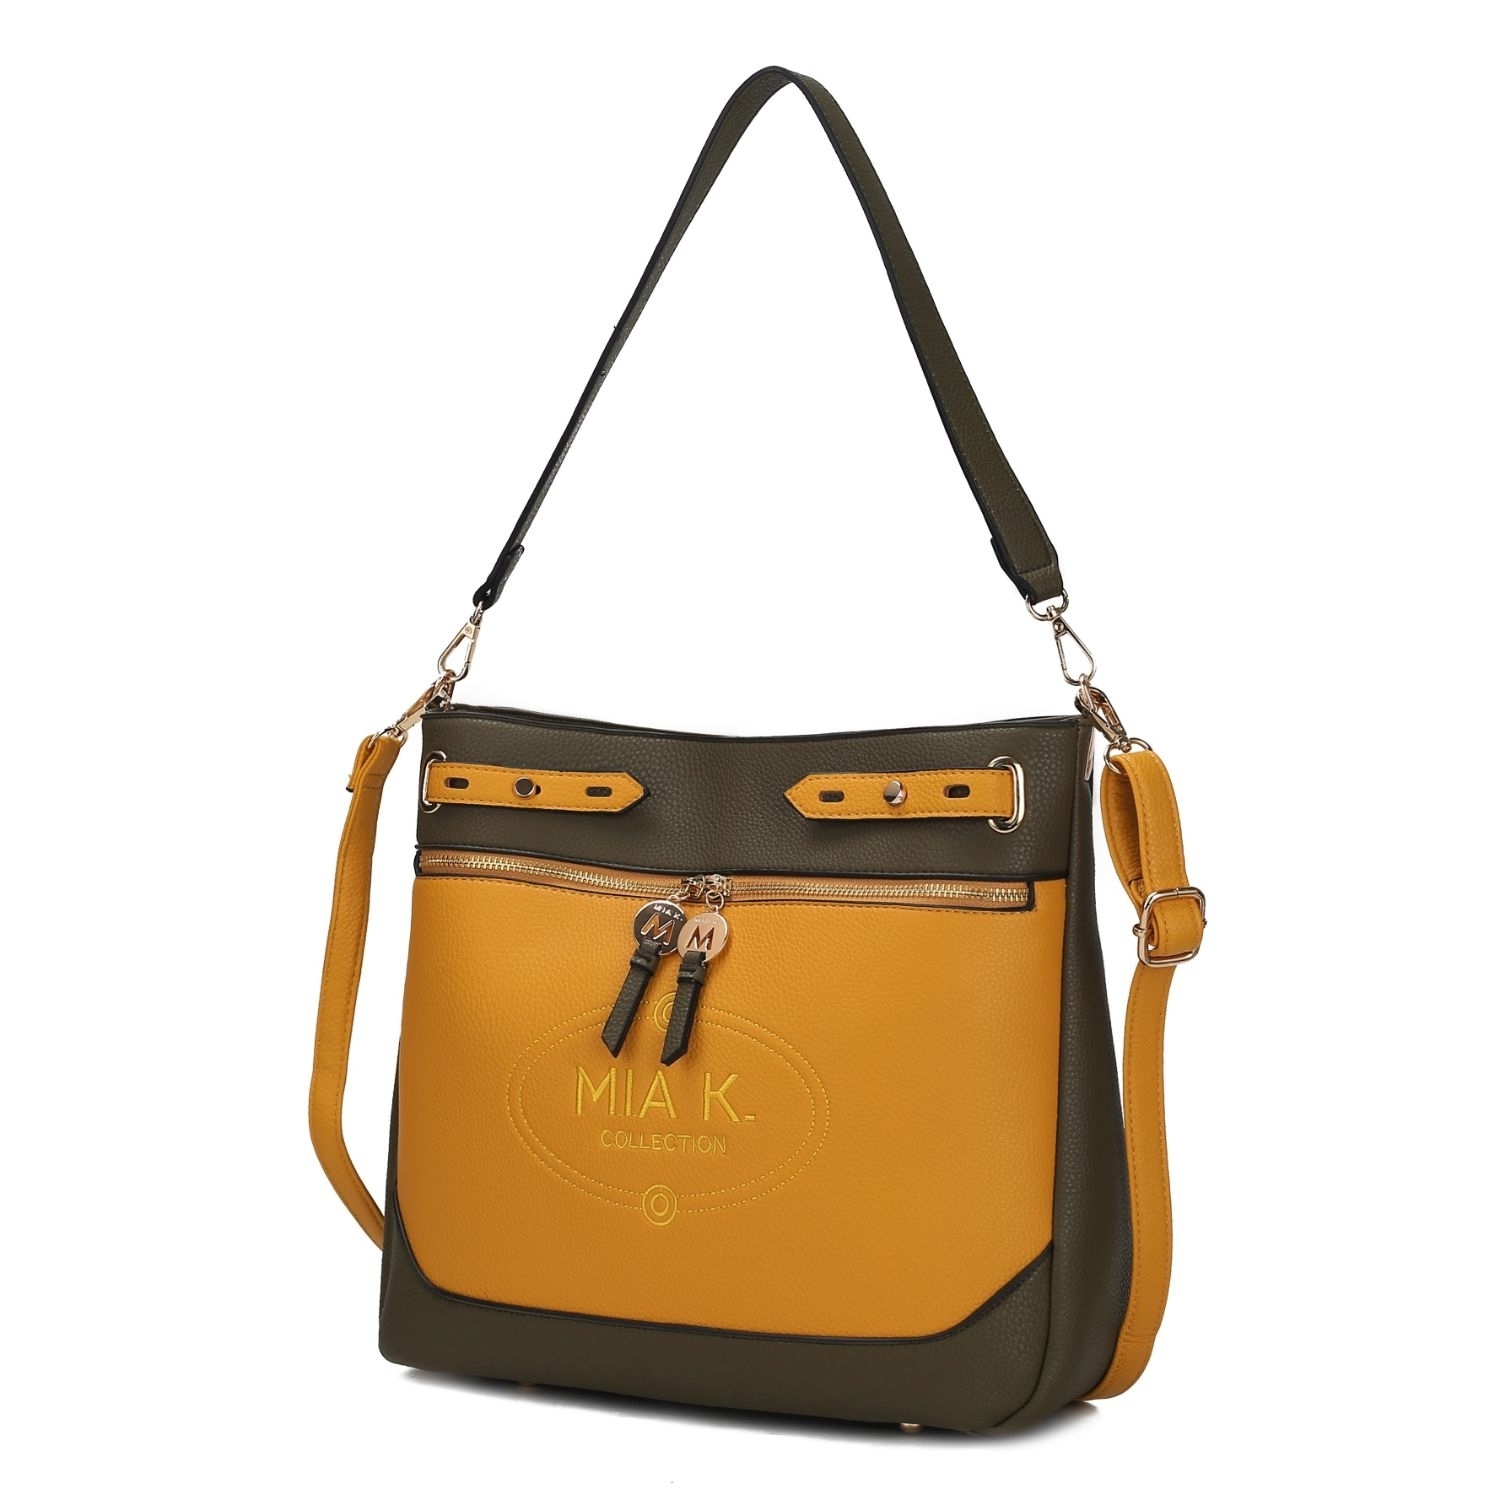 MKF Collection Evie Two-tone Vegan Leather Women's Shoulder Bag By Mia K. - Olive-mustard